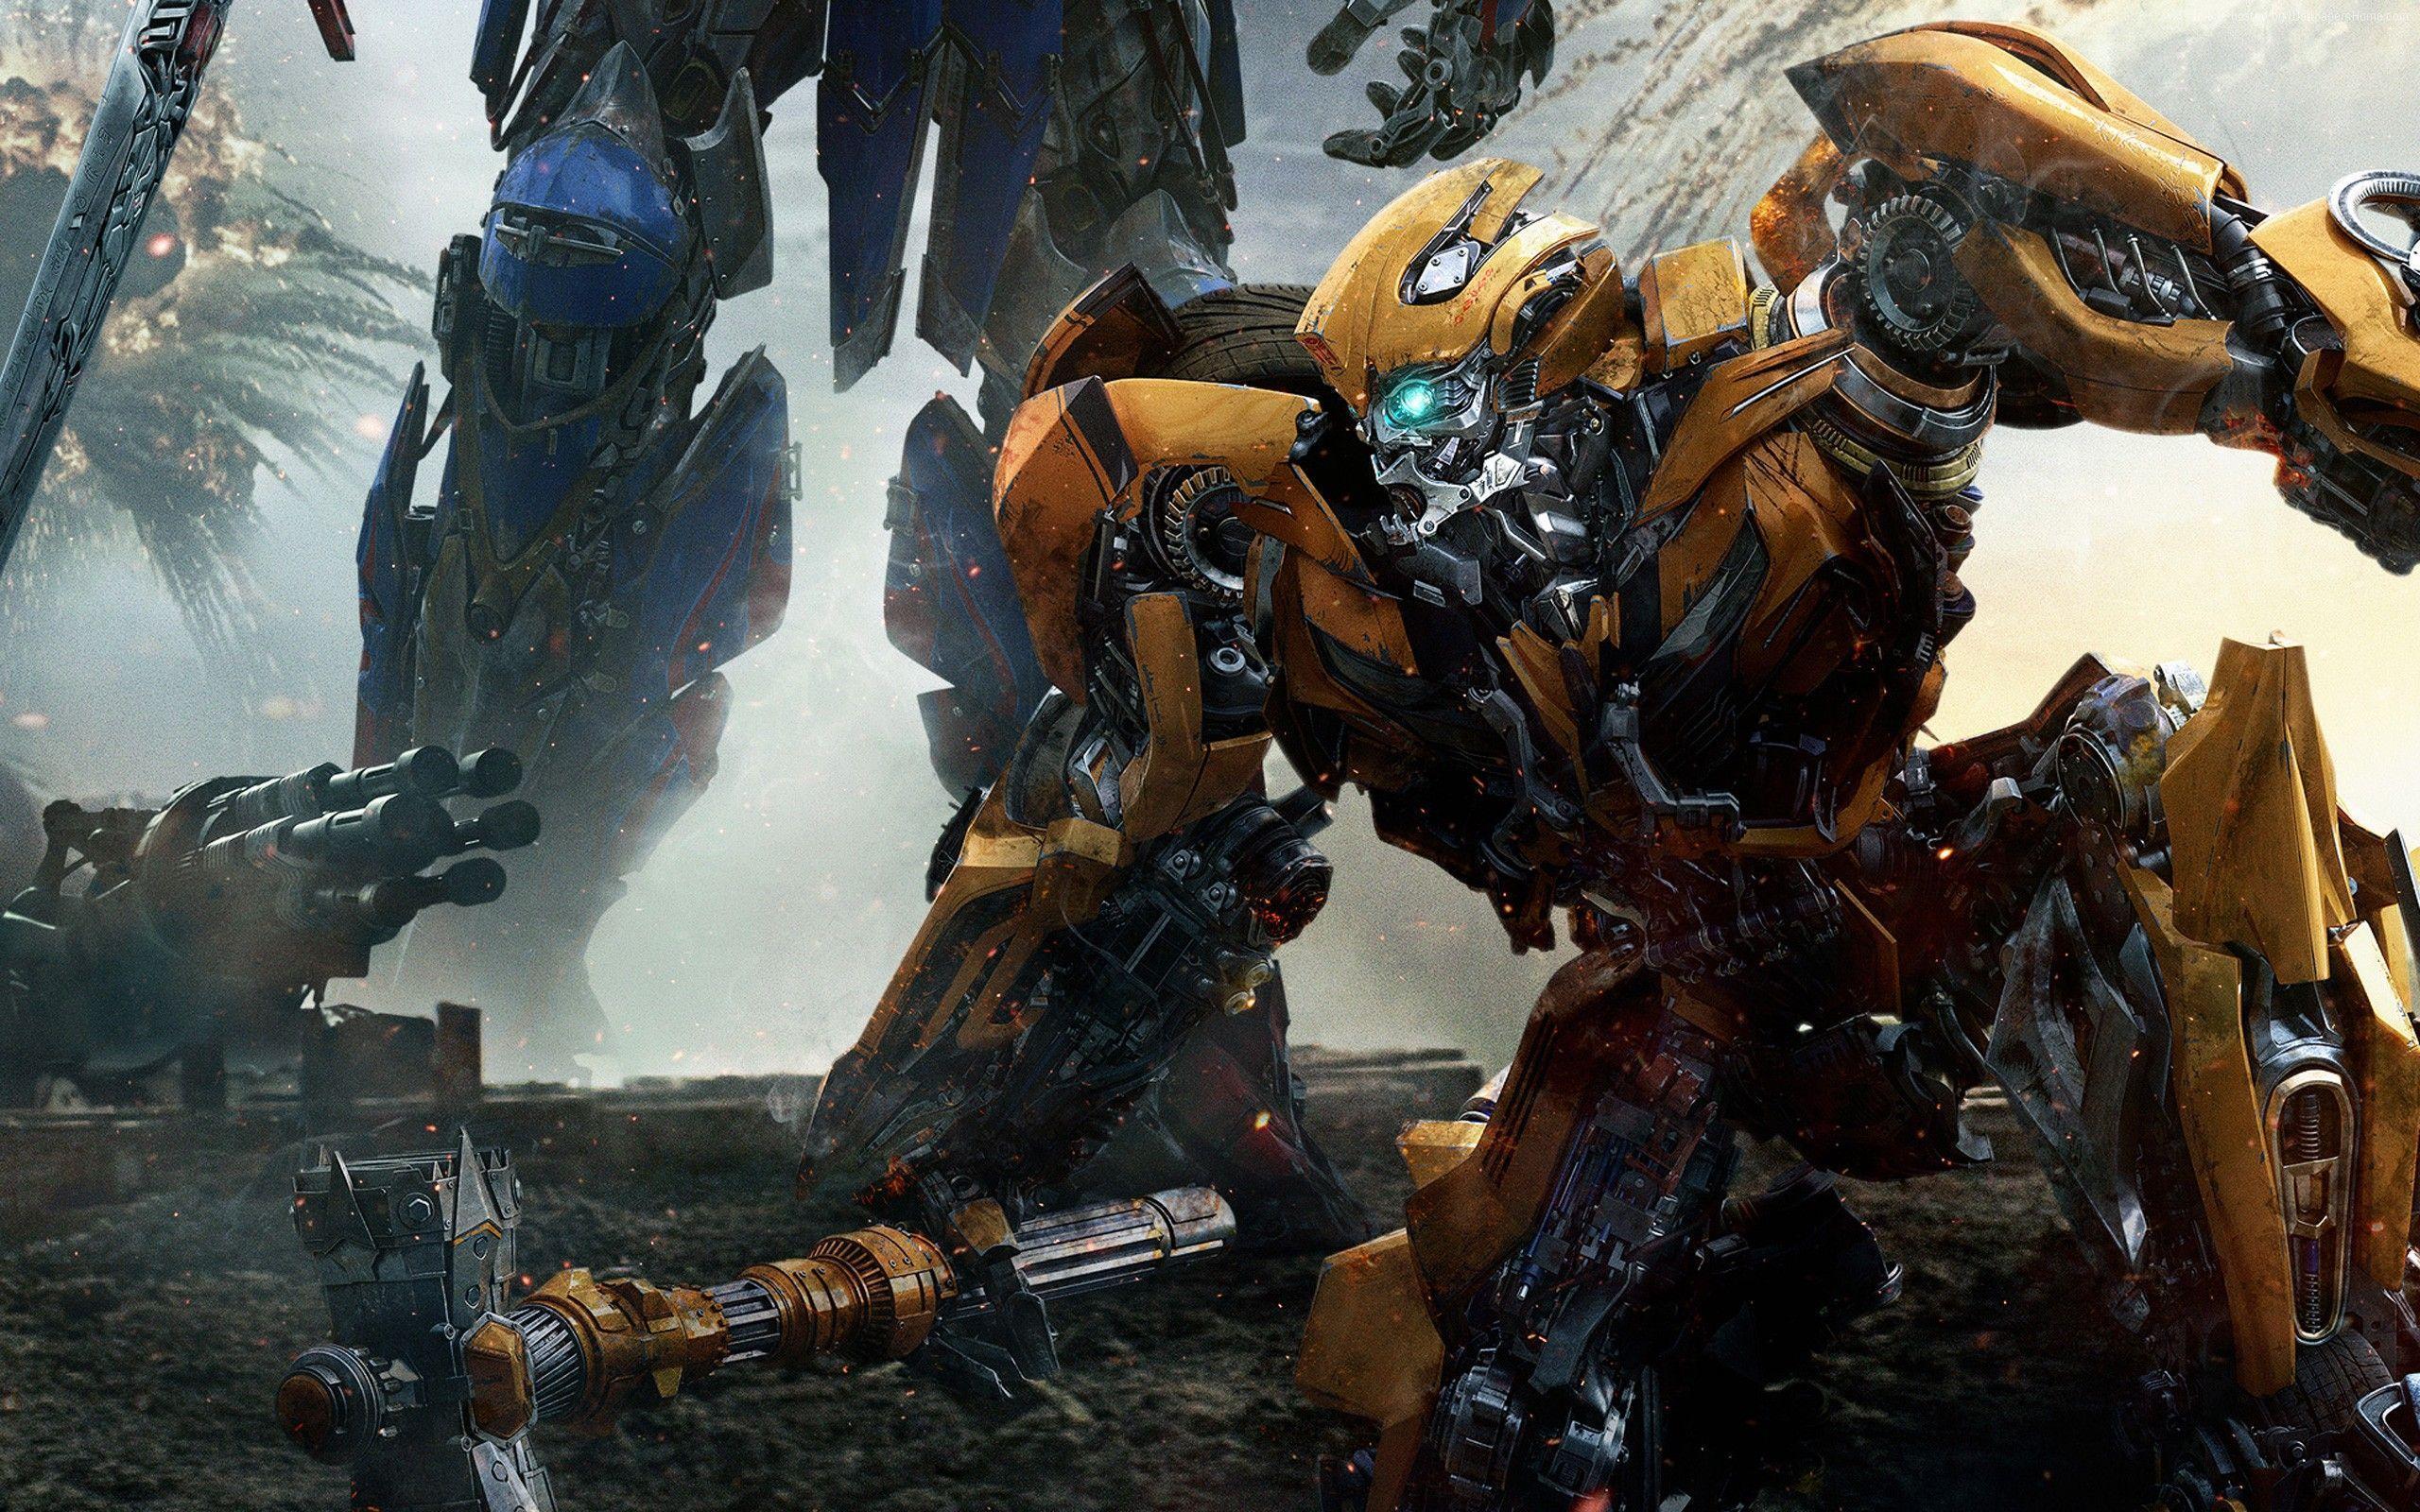 Wallpapers Transformers: The Last Knight, Transformers 5, Bumblebee